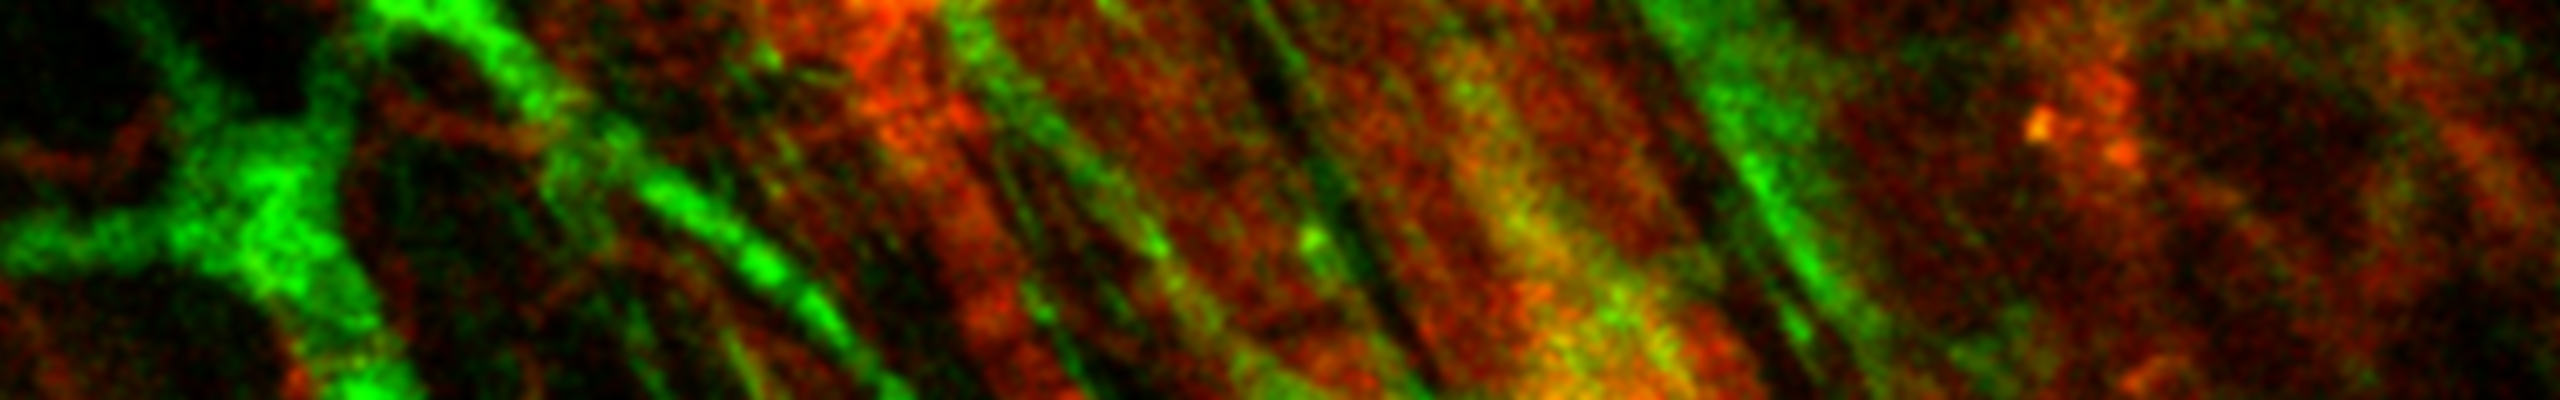 microscope image from Shen lab